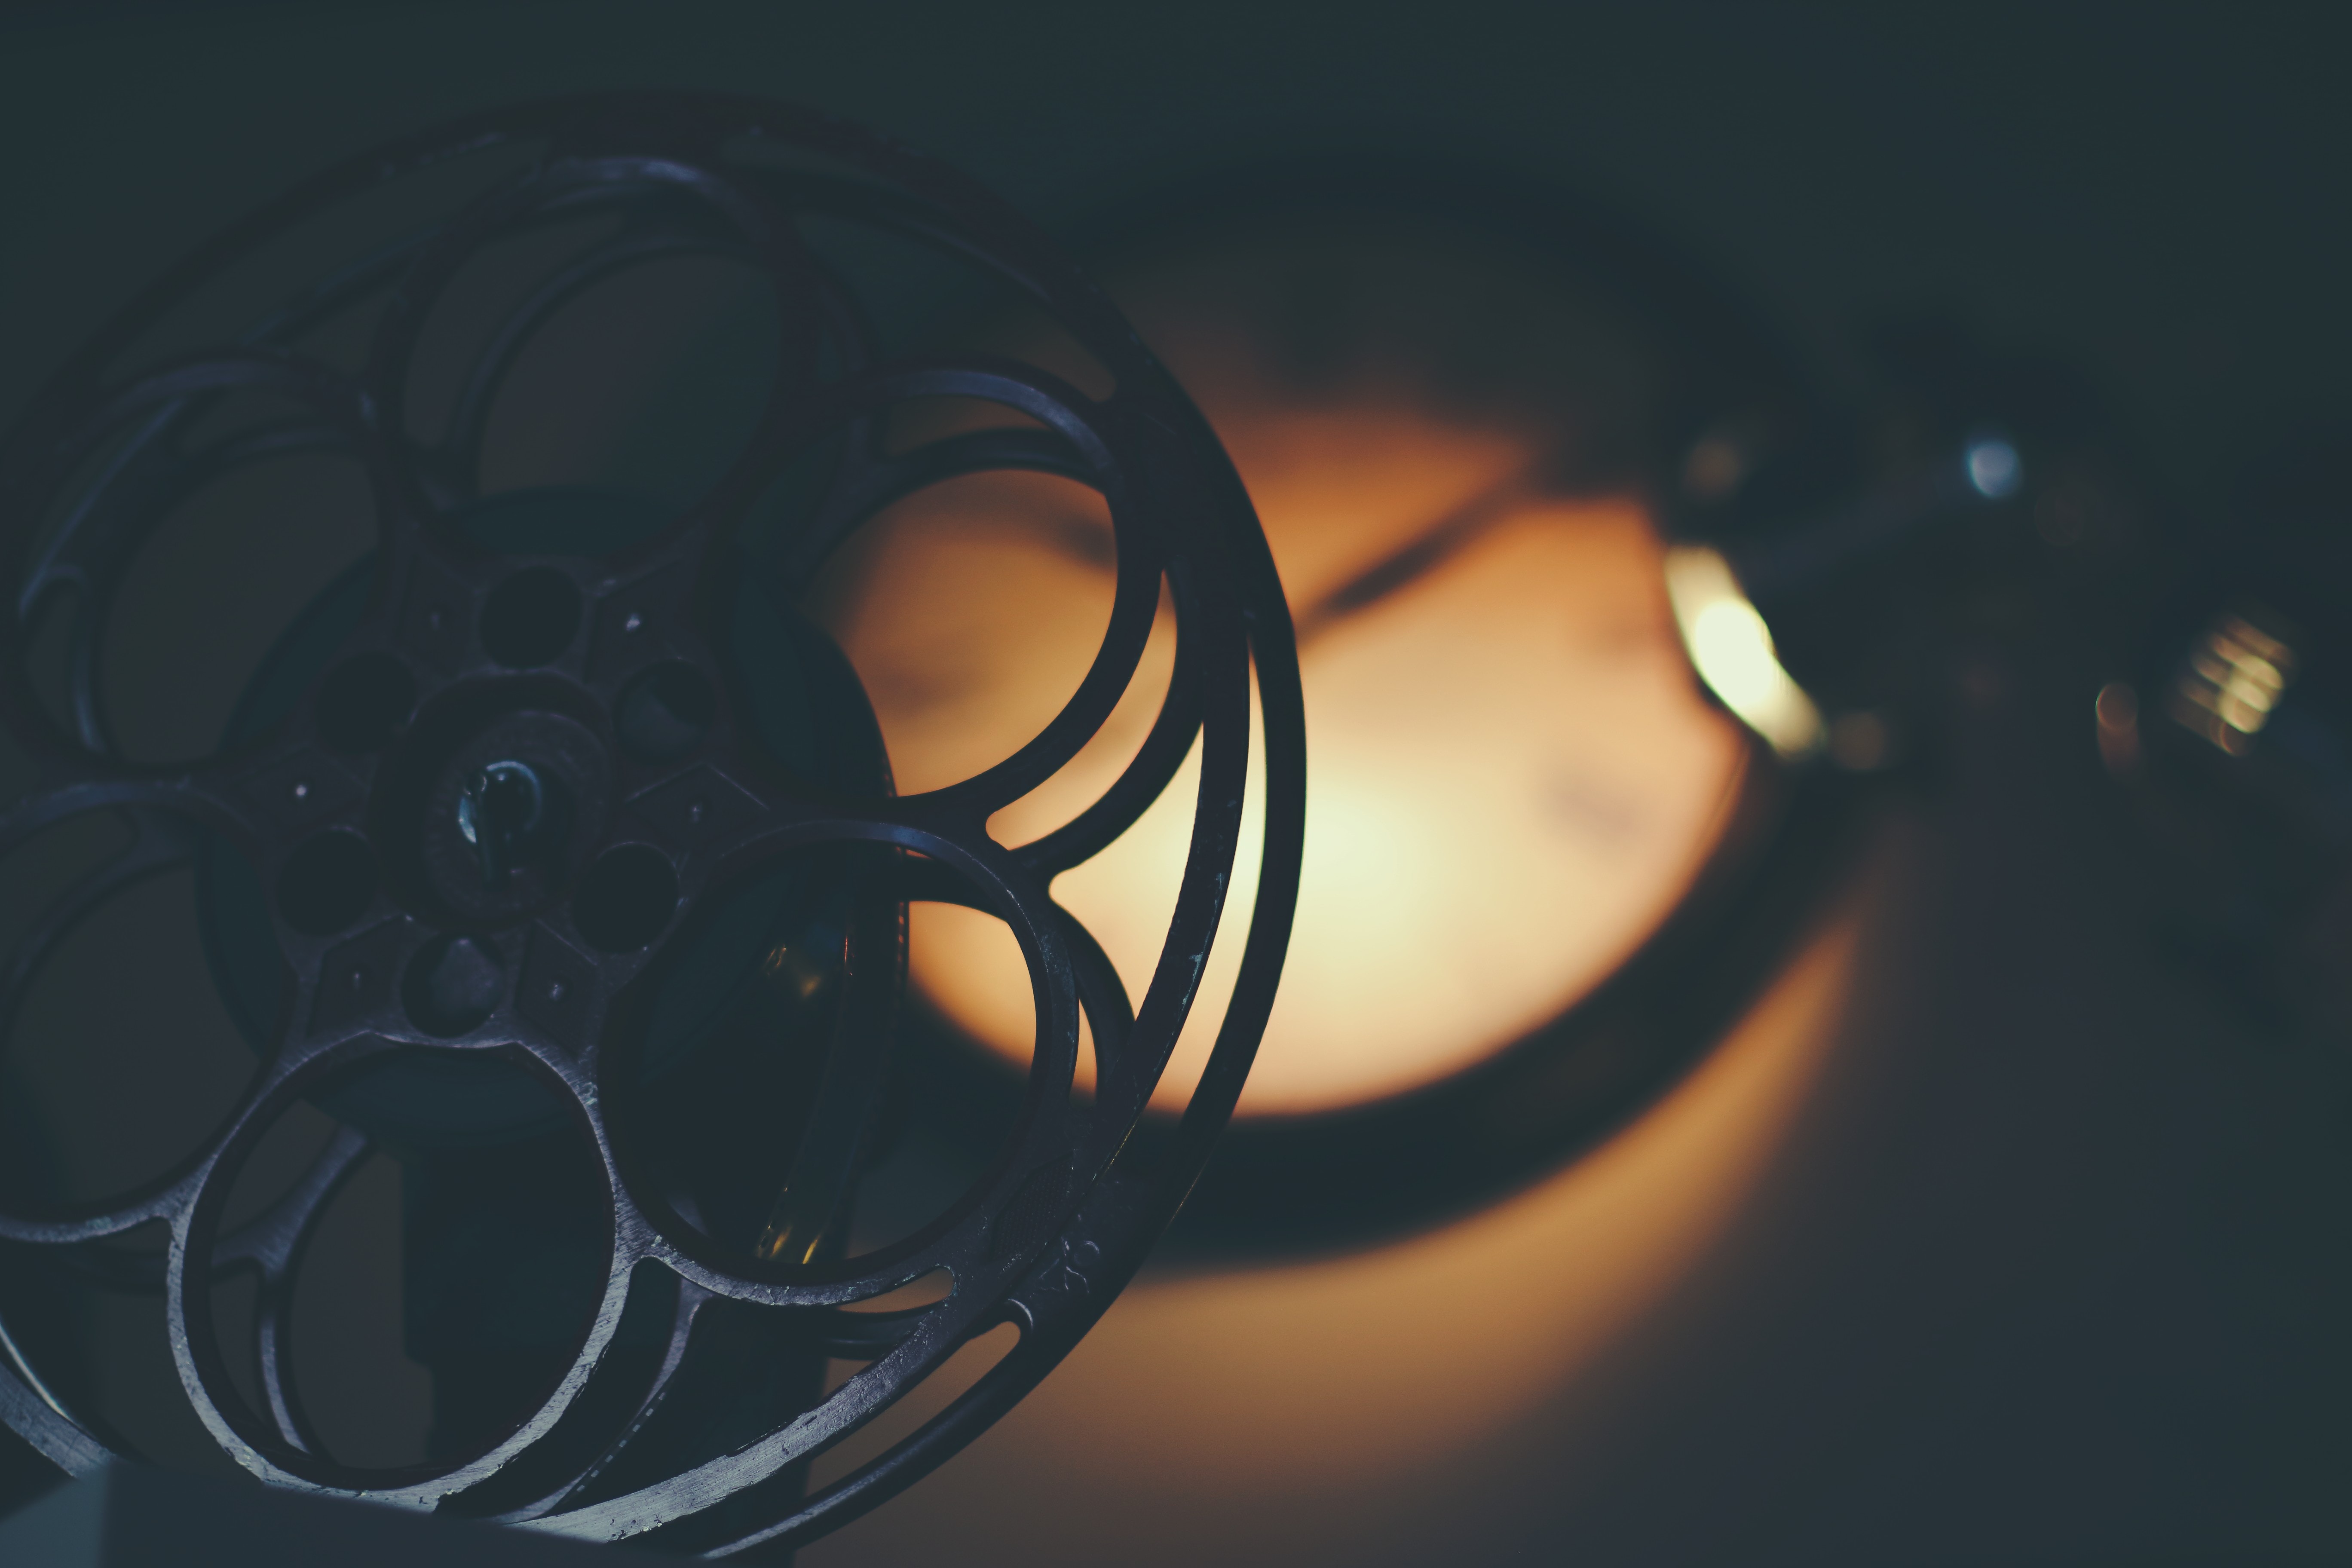 A close up image of a reel of film.